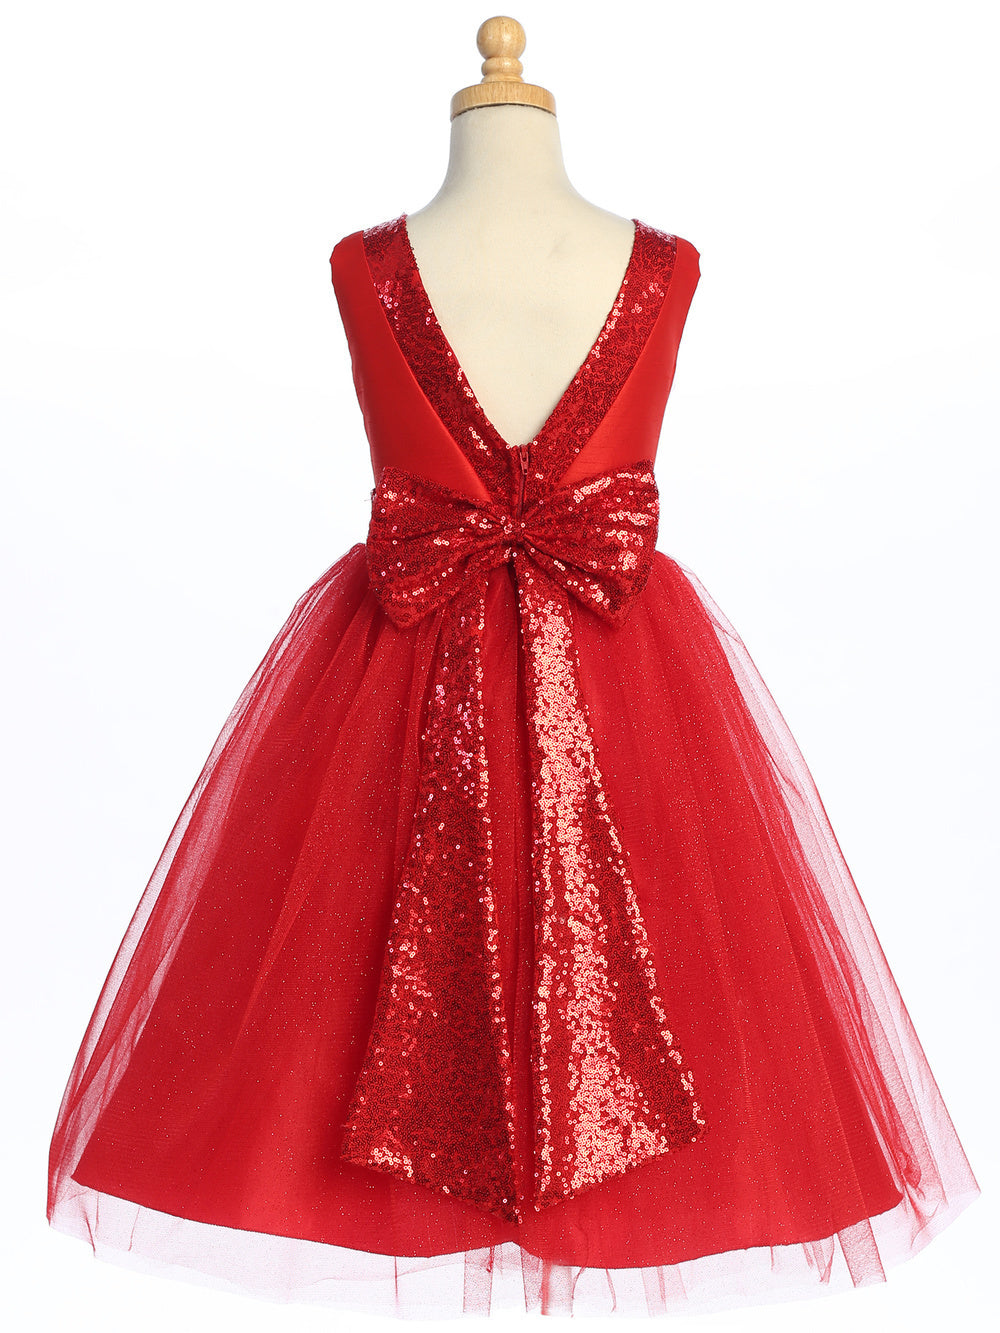 Flower girl stuns in a sequined red shantung dress with glimmering tulle.